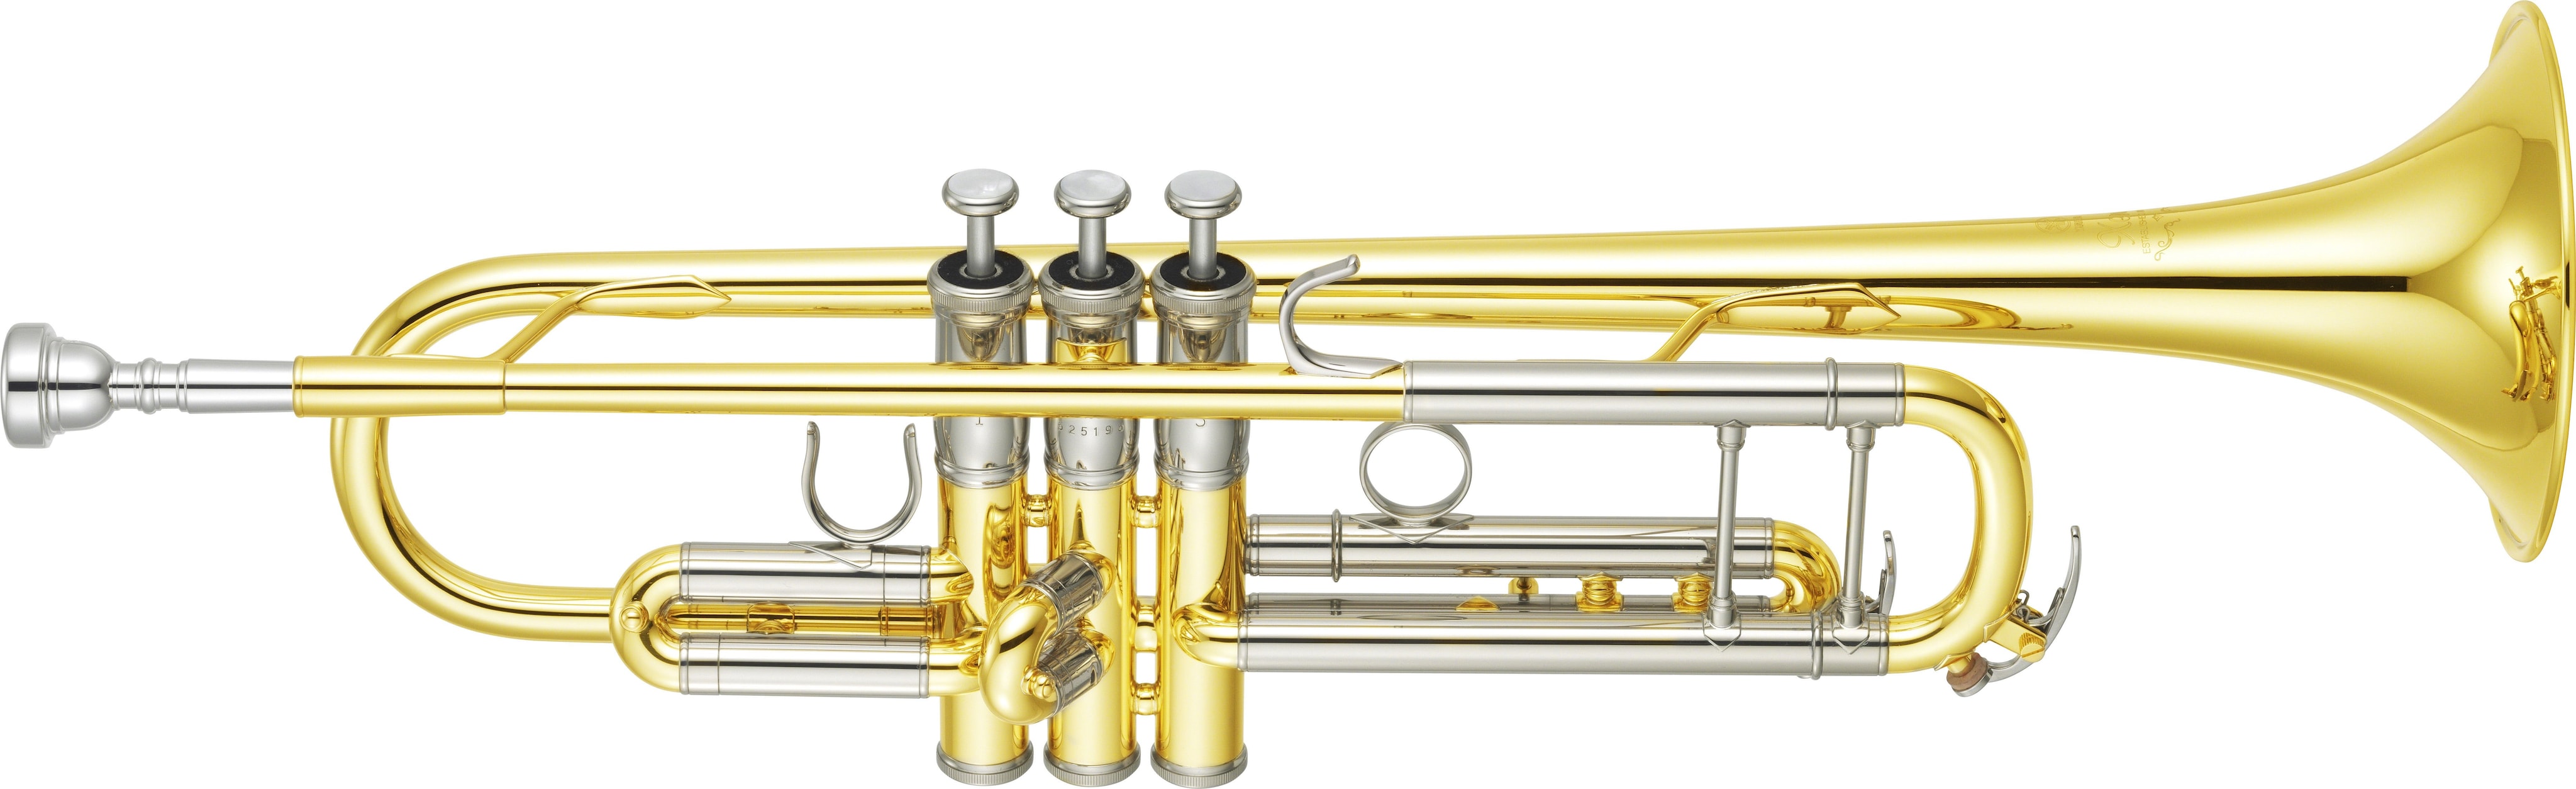 YTR-8335S - Overview - Bb Trumpets - Trumpets - Brass 